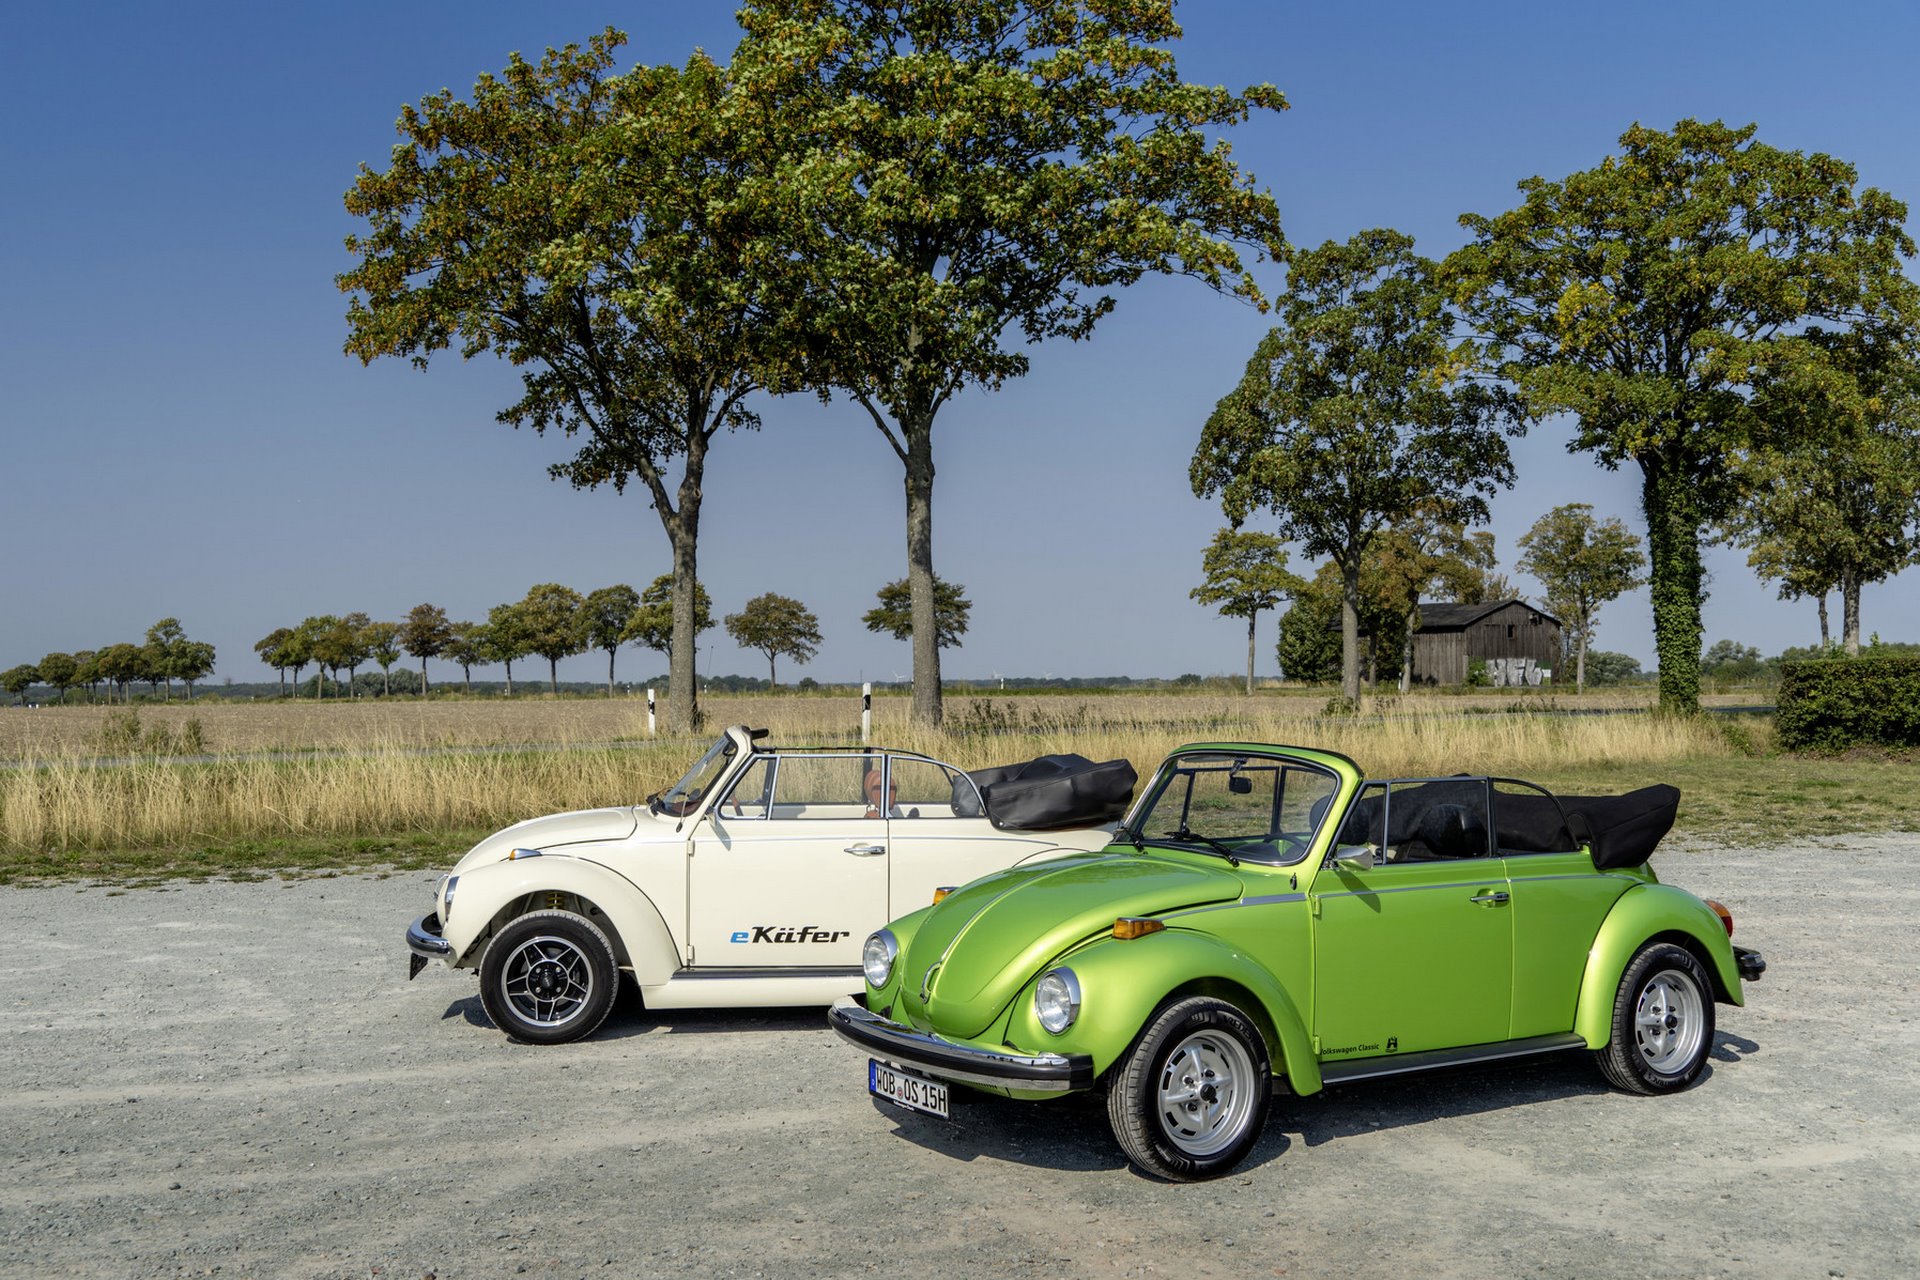 The e-Beetle and a green Beetle with boxer engine